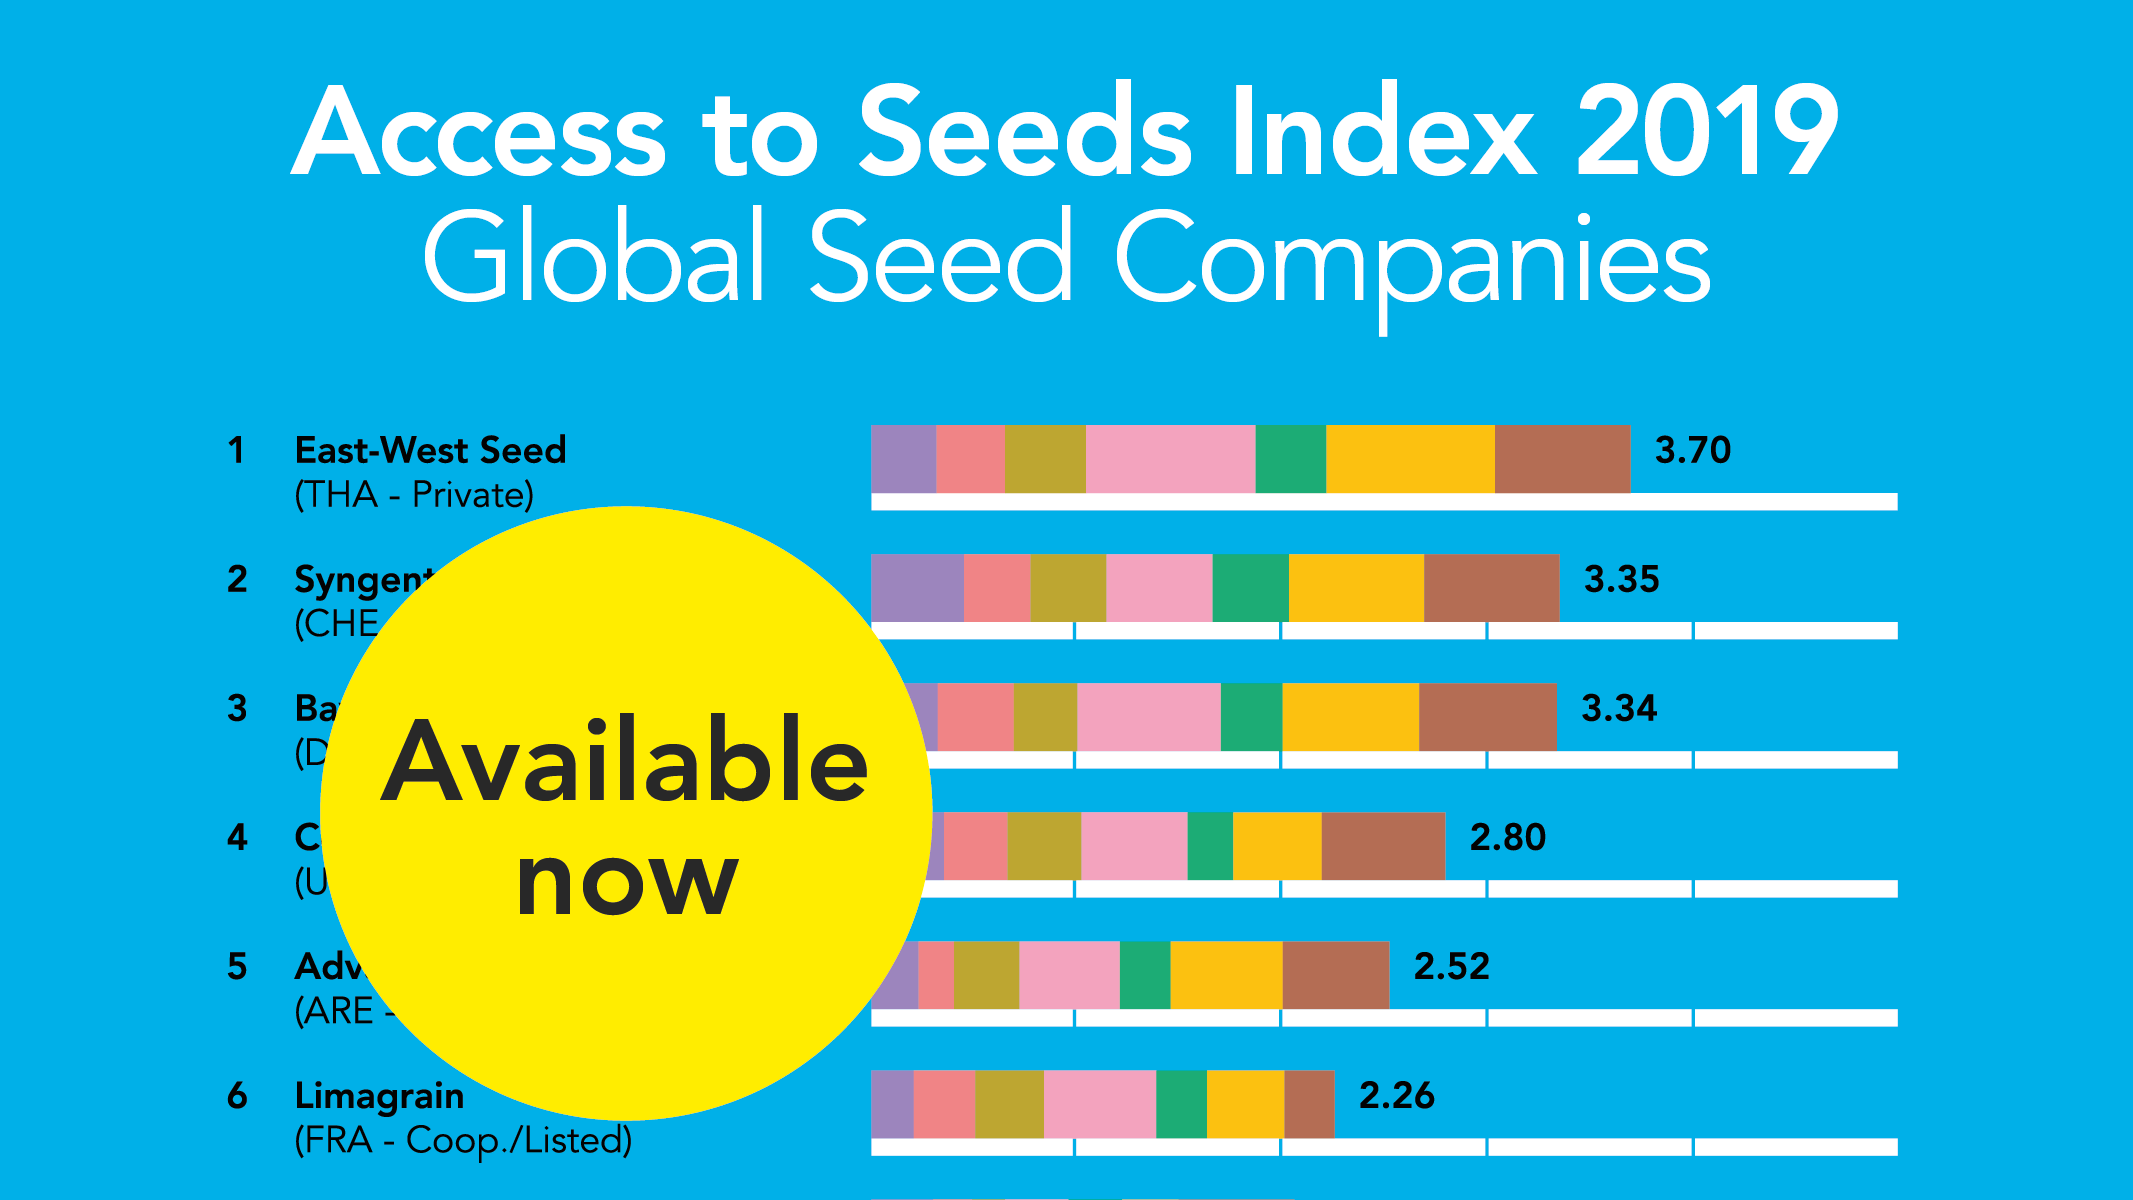 Available now Access to Seeds Index 2019 Global Seed Companies